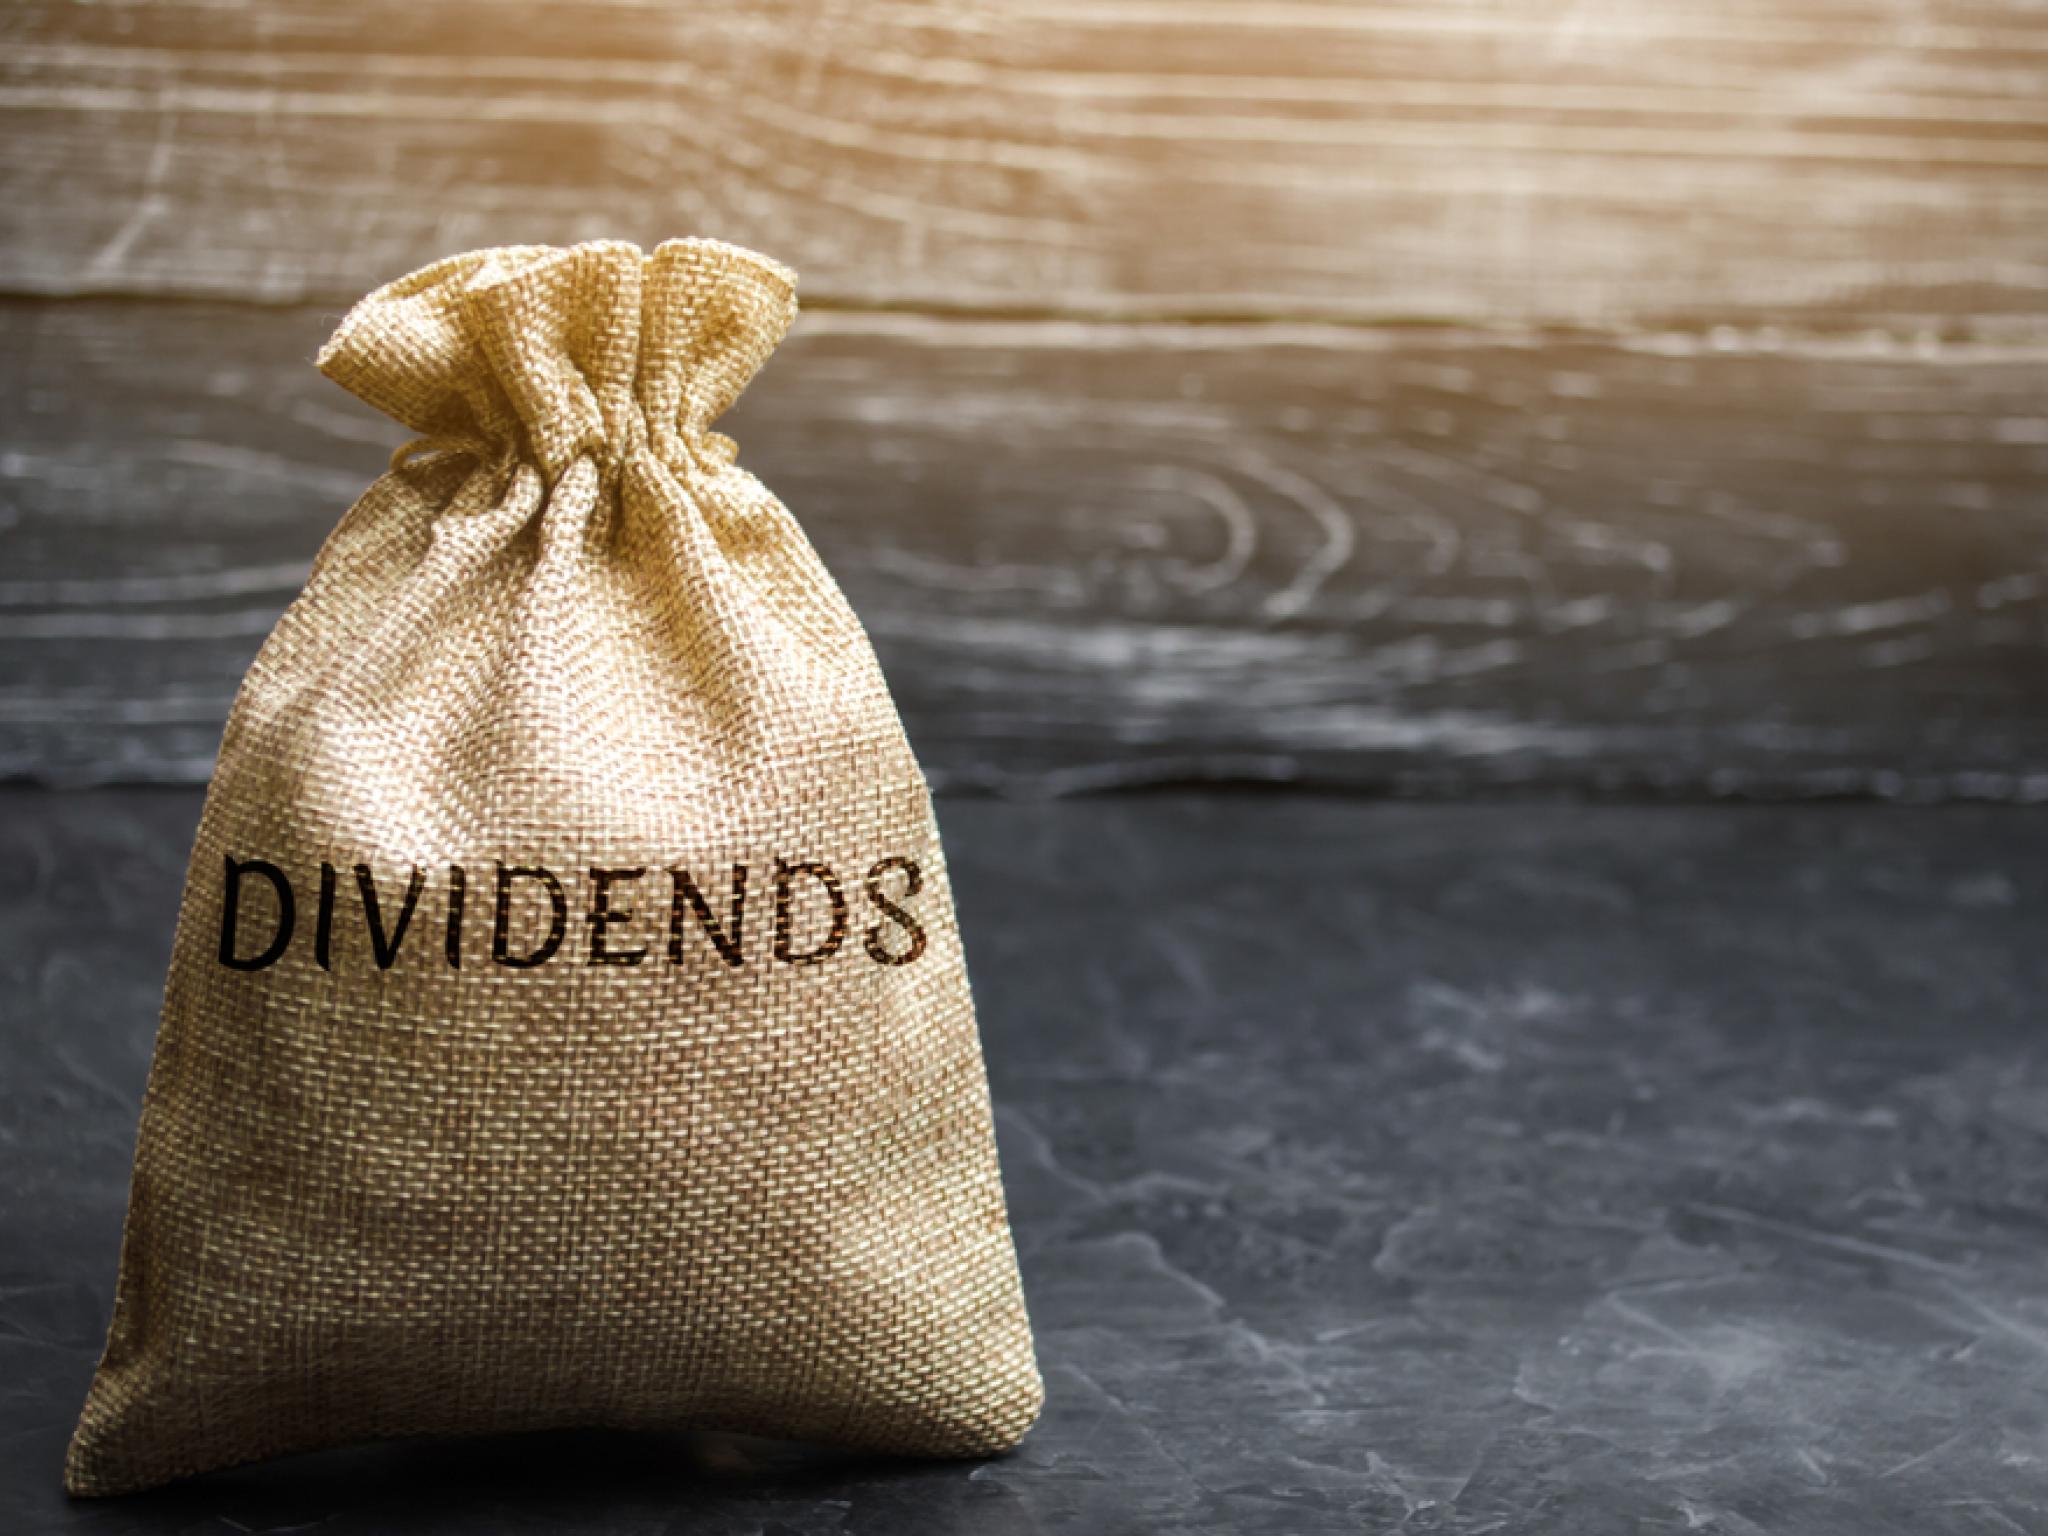  wall-streets-most-accurate-analysts-views-on-3-materials-stocks-with-over-4-dividend-yields 